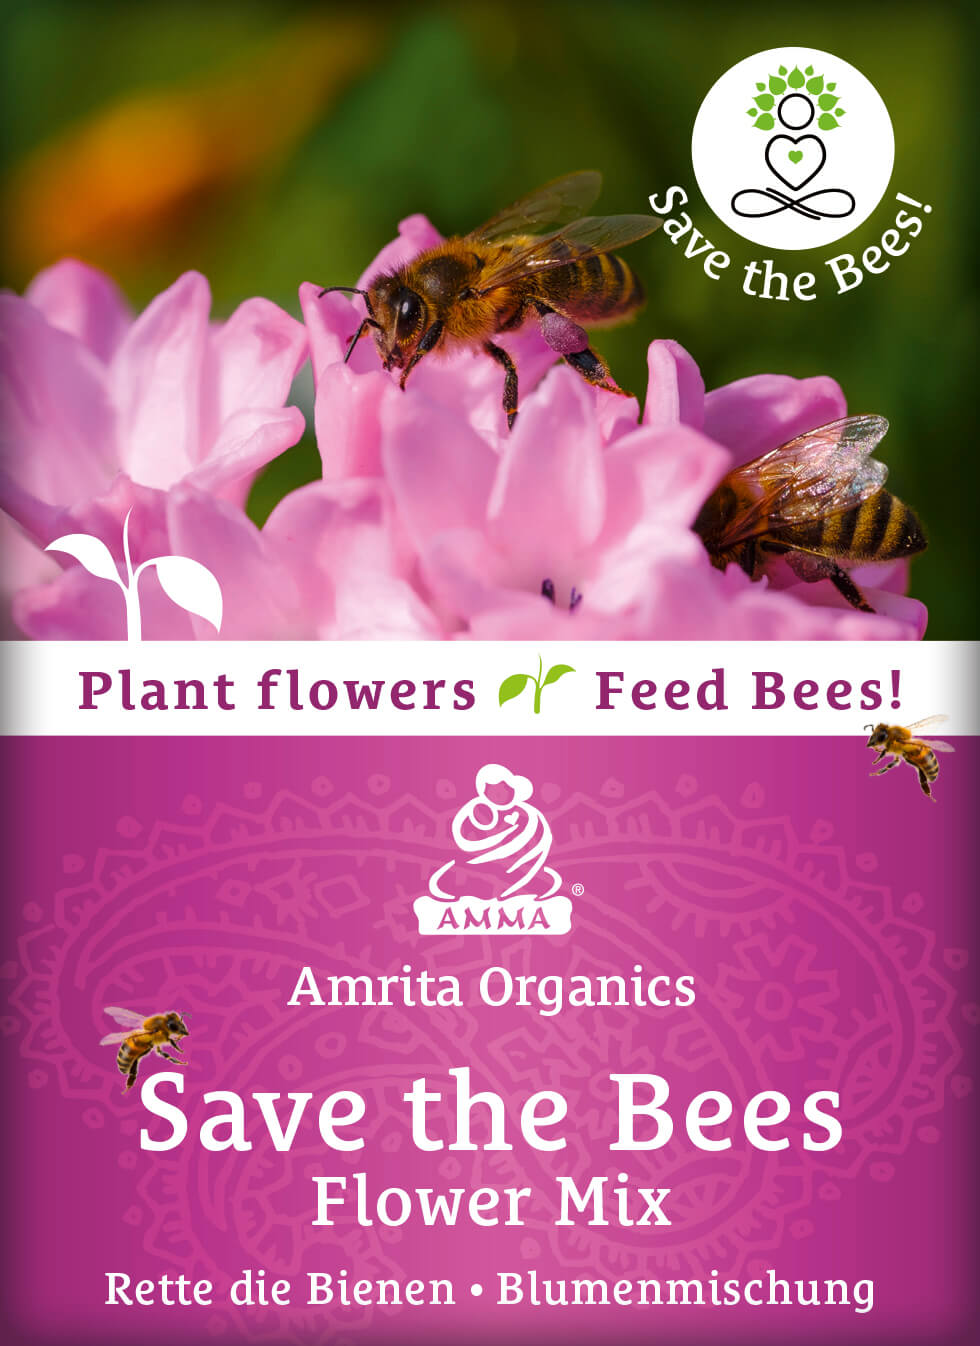 Save the bees - flower mixture, organic